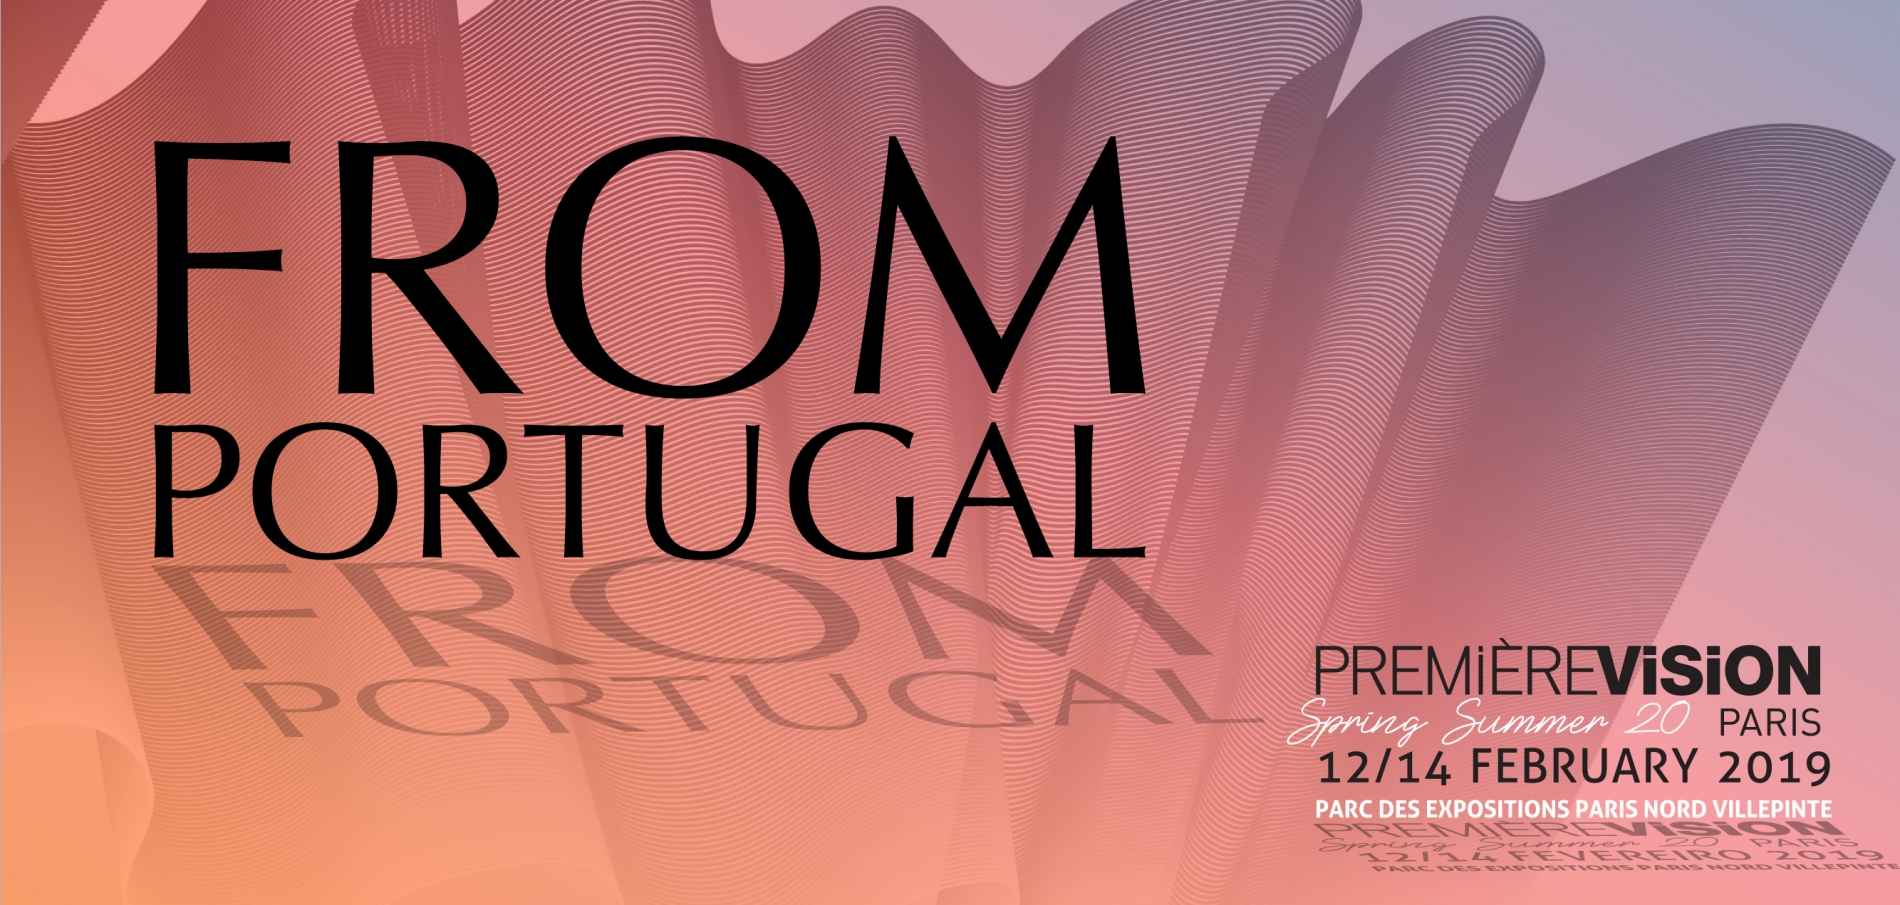 Portuguese textiles at Première Vision are an example of sustainability and innovation